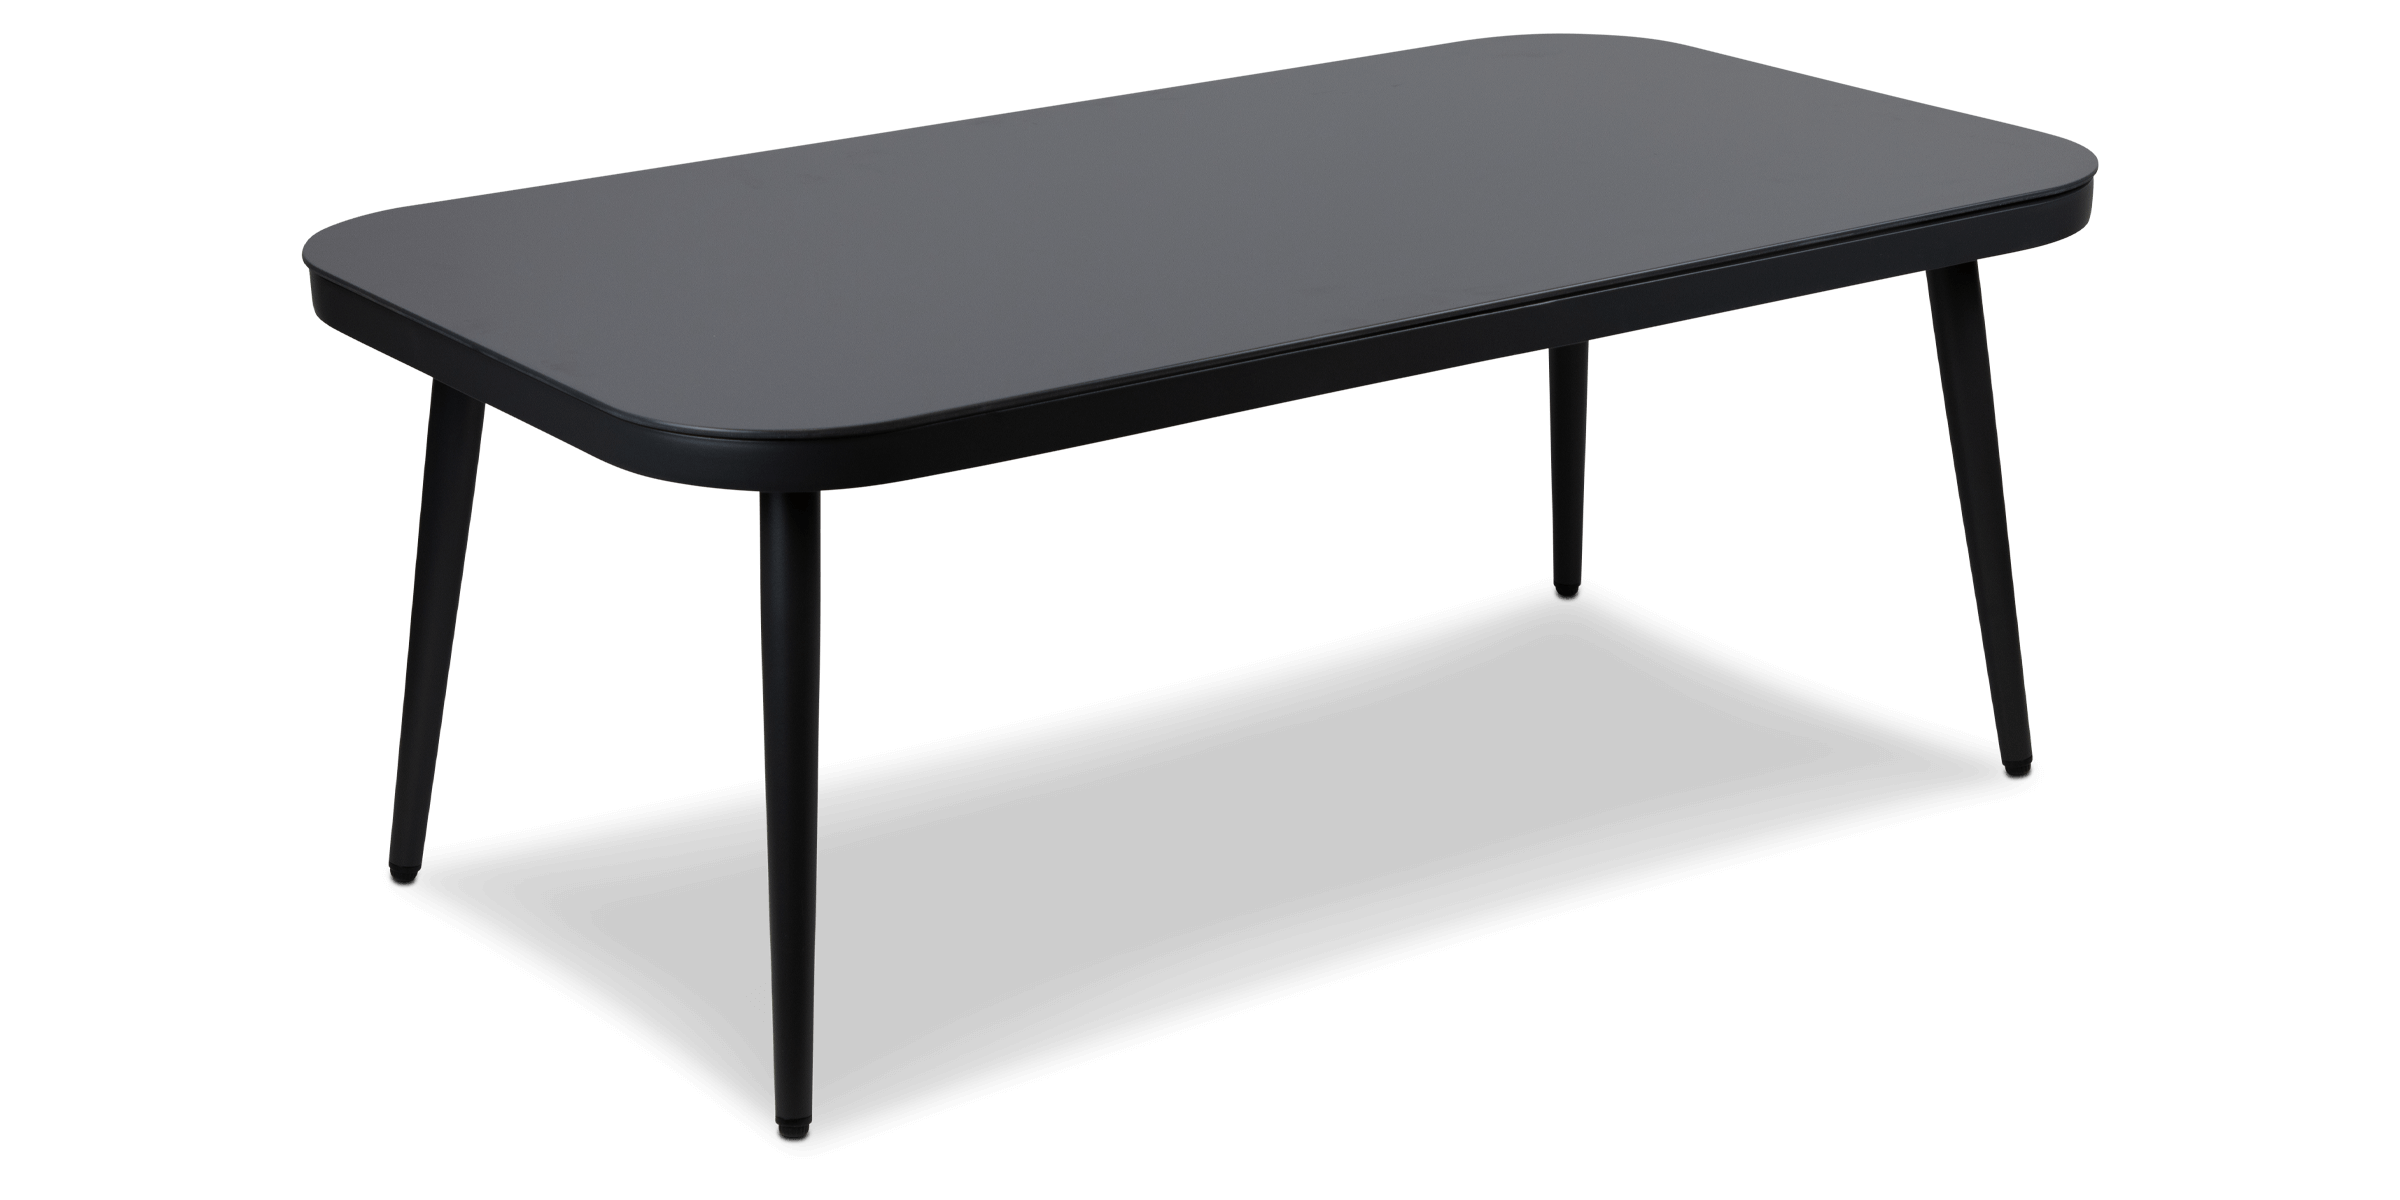 Santa Monica Coffee Table with Tempered Glass Top and Gunmetal Aluminium Frame